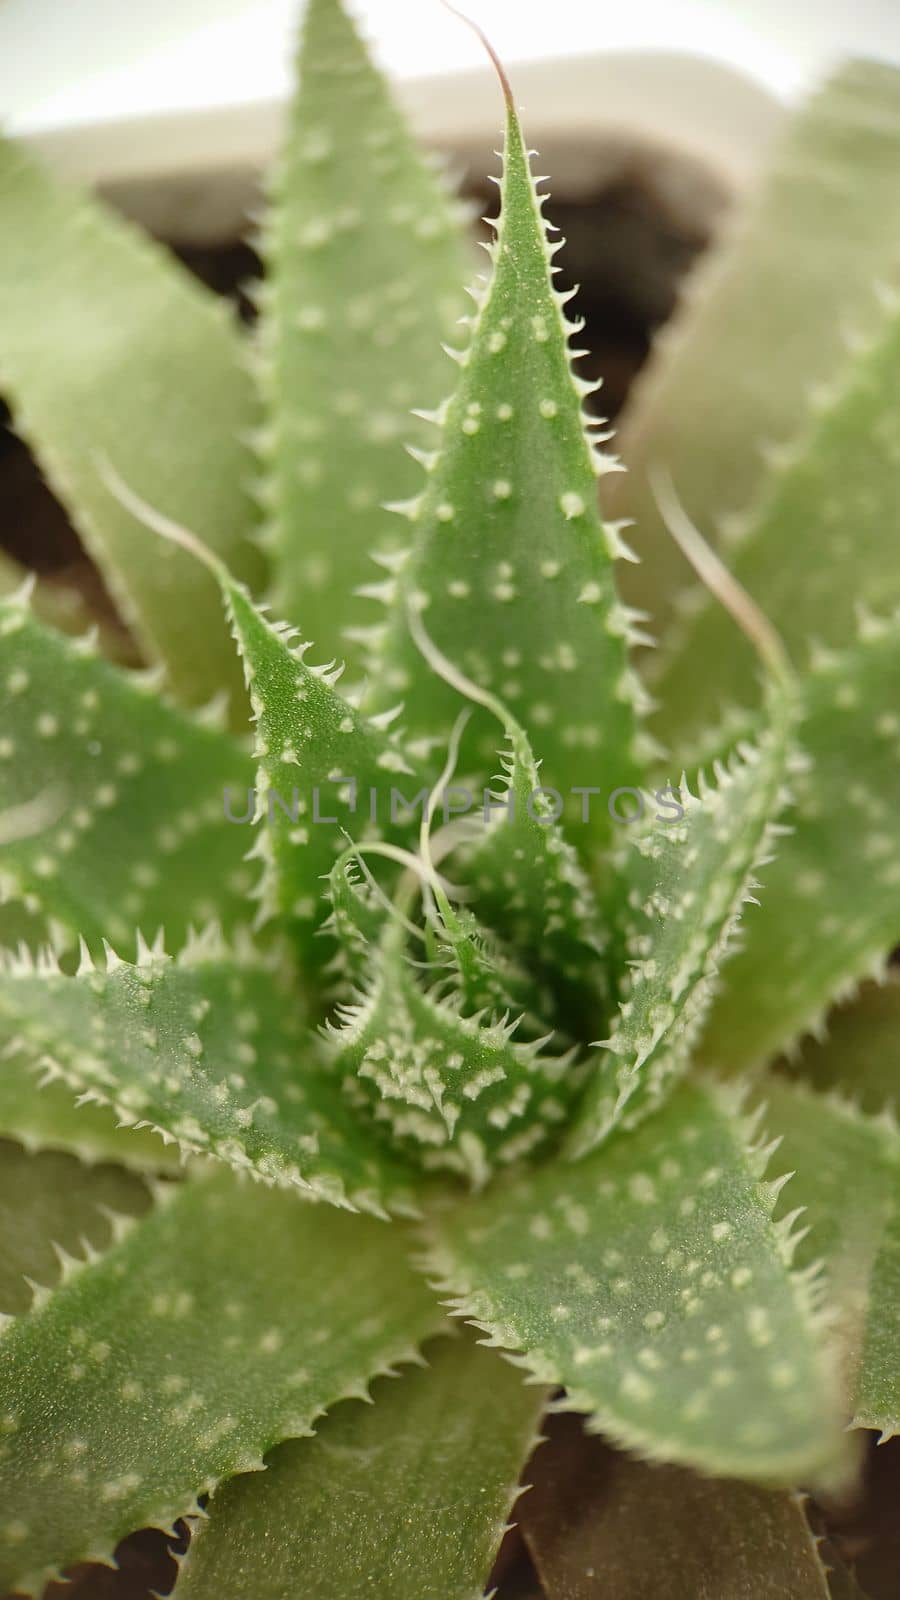 Lily family green cactus aloe close-up in a pot by Mastak80